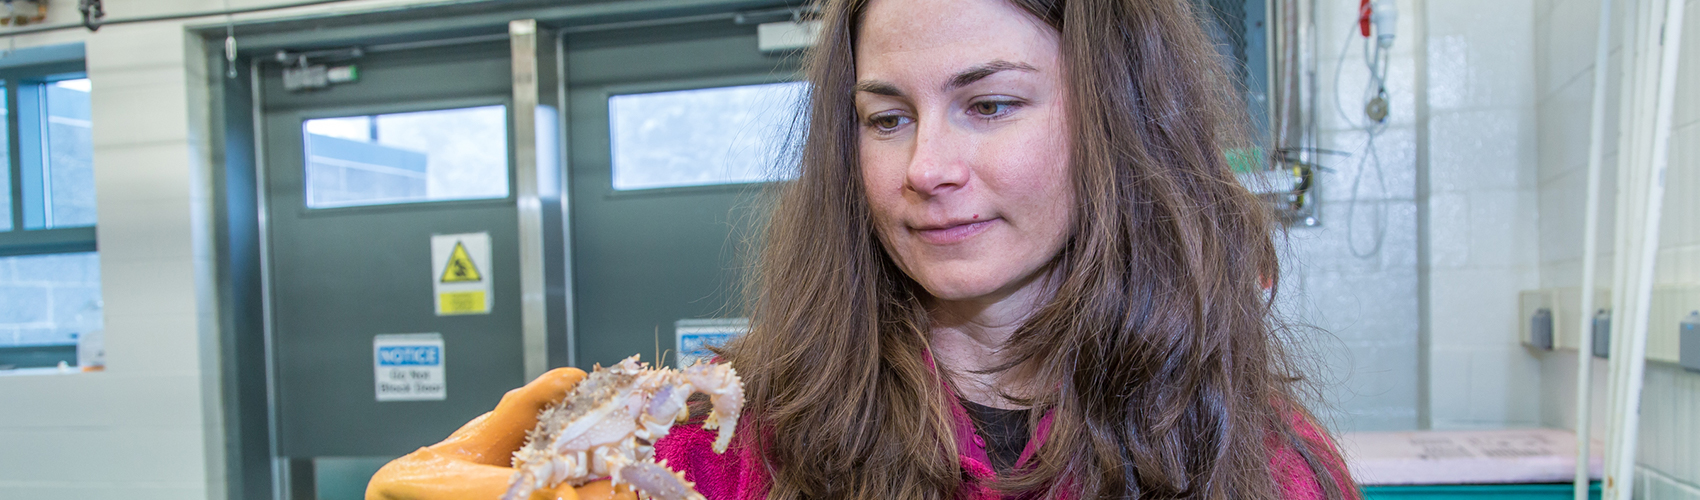 Fisheries major Christy Howard inspects one of the immature king crabs being kept for study at UAF's Lena Point facility near Juneau.